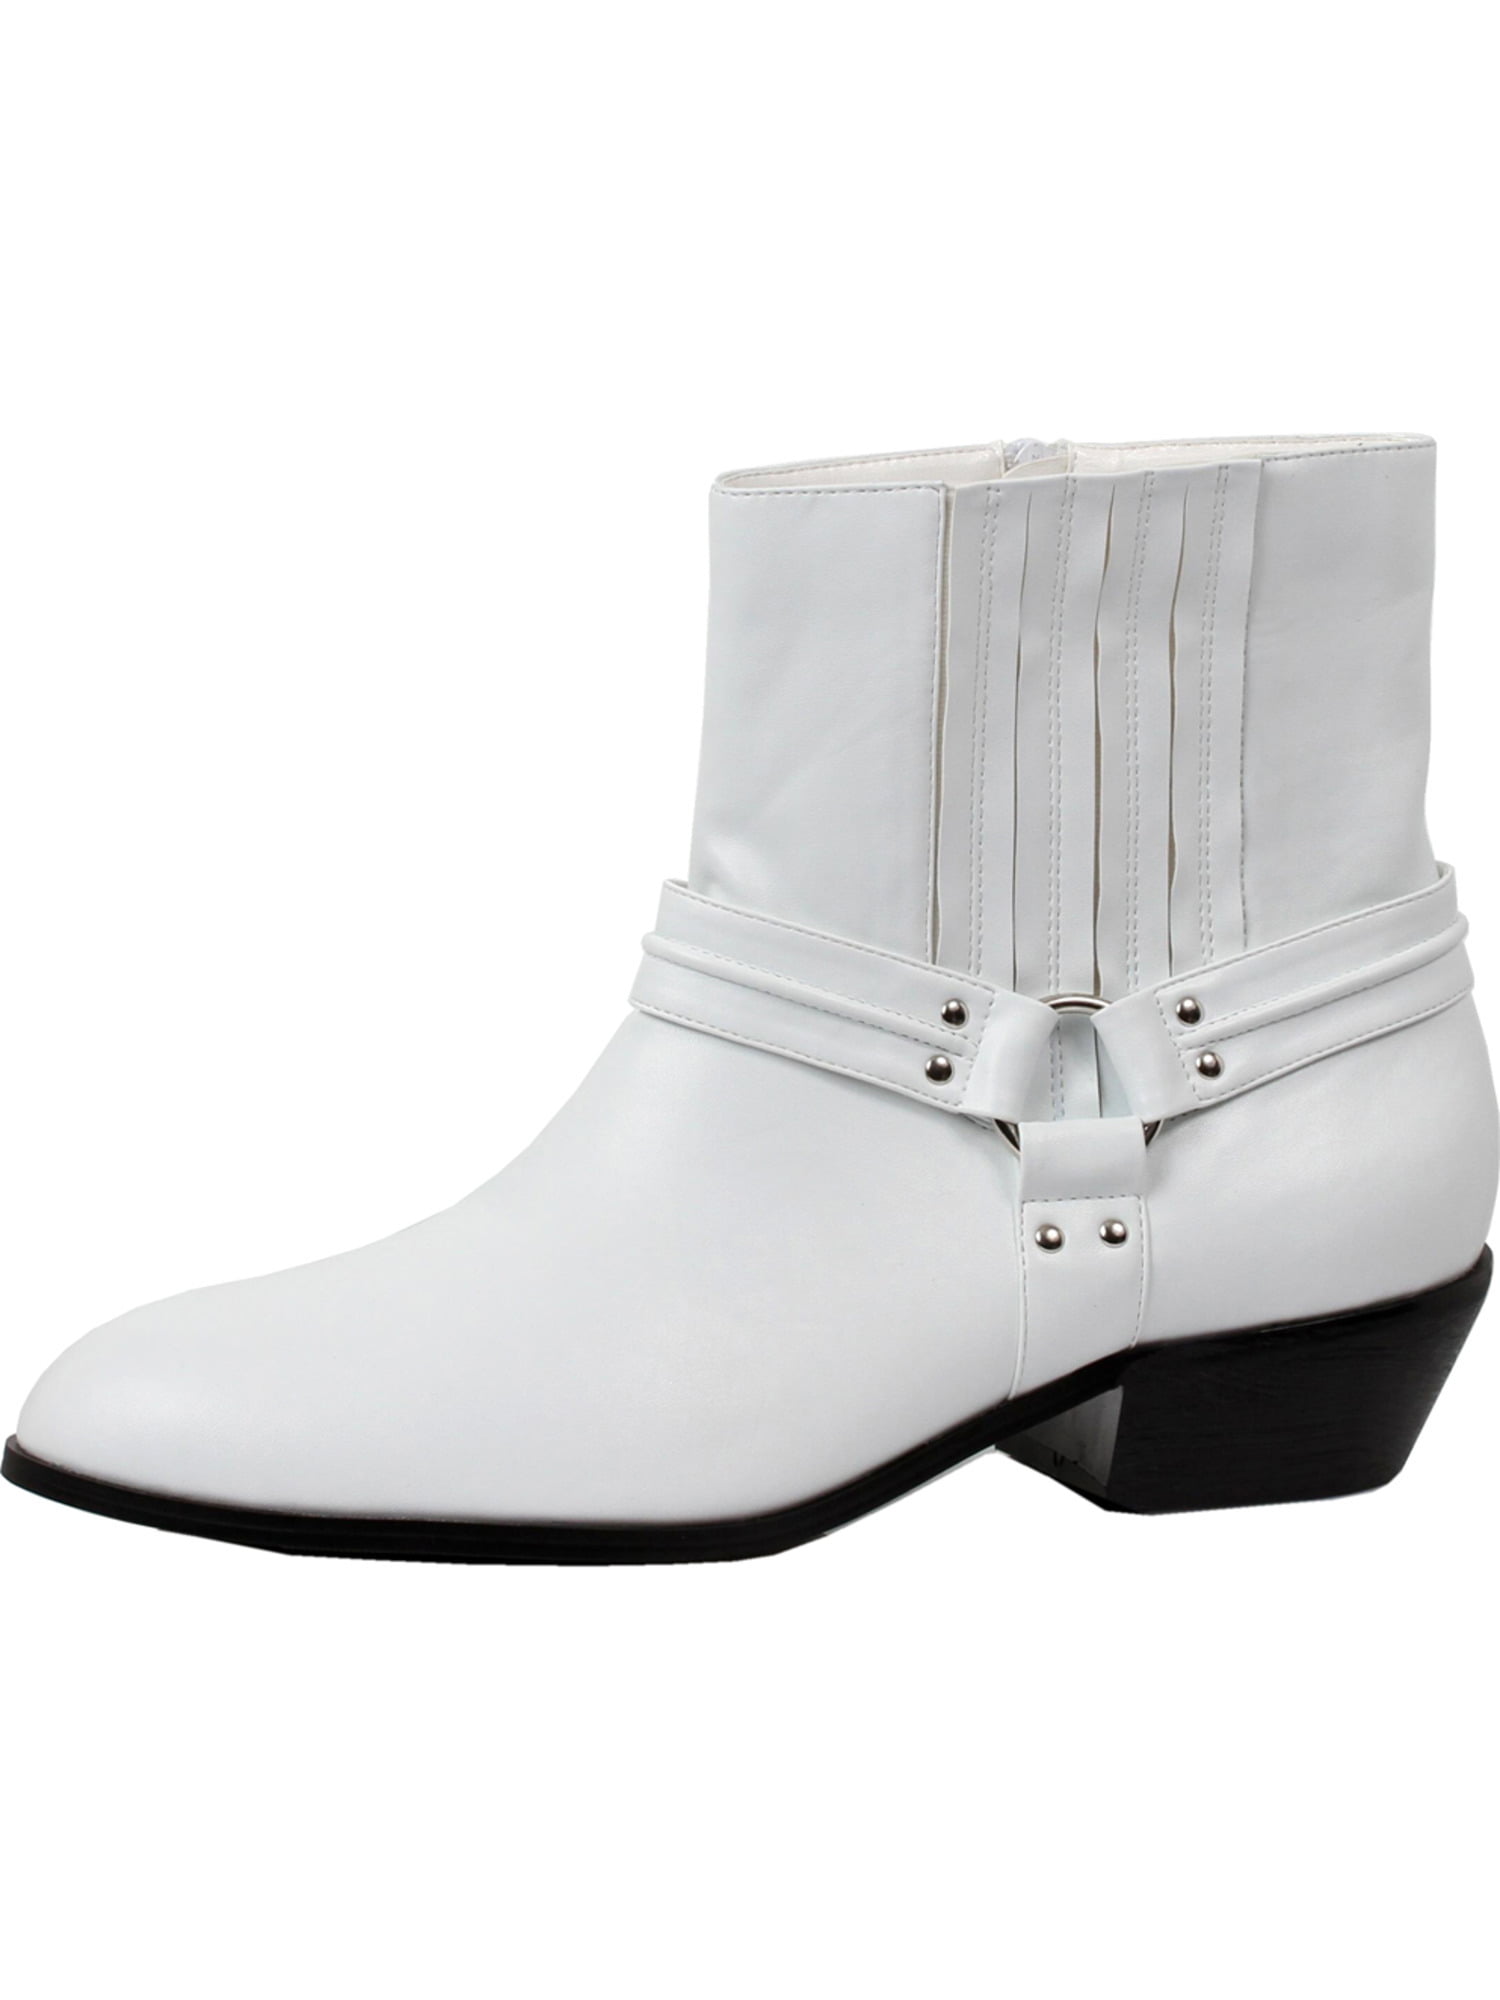 Mens Ankle Boots White Western Calf 